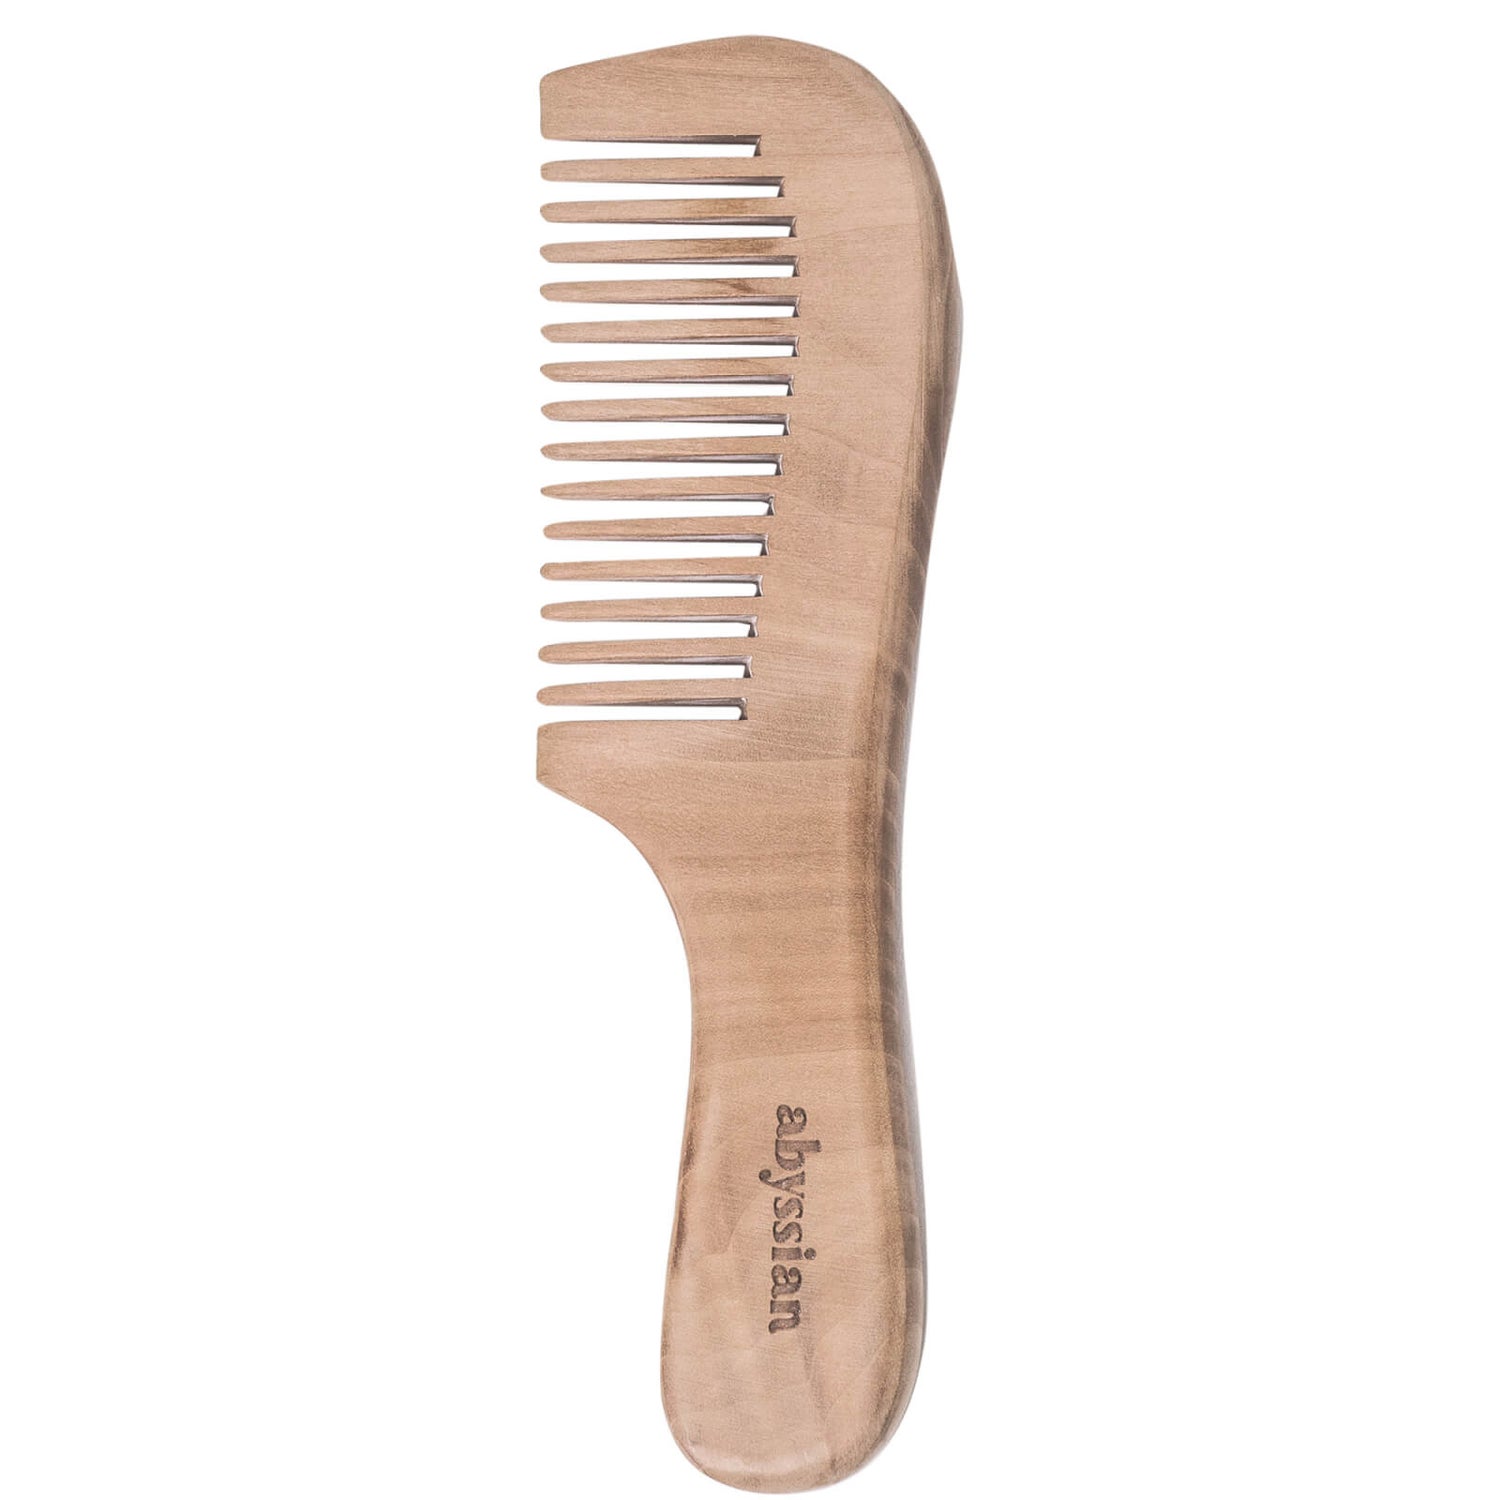 Peach Wood Comb Wide Tooth – Abyssian